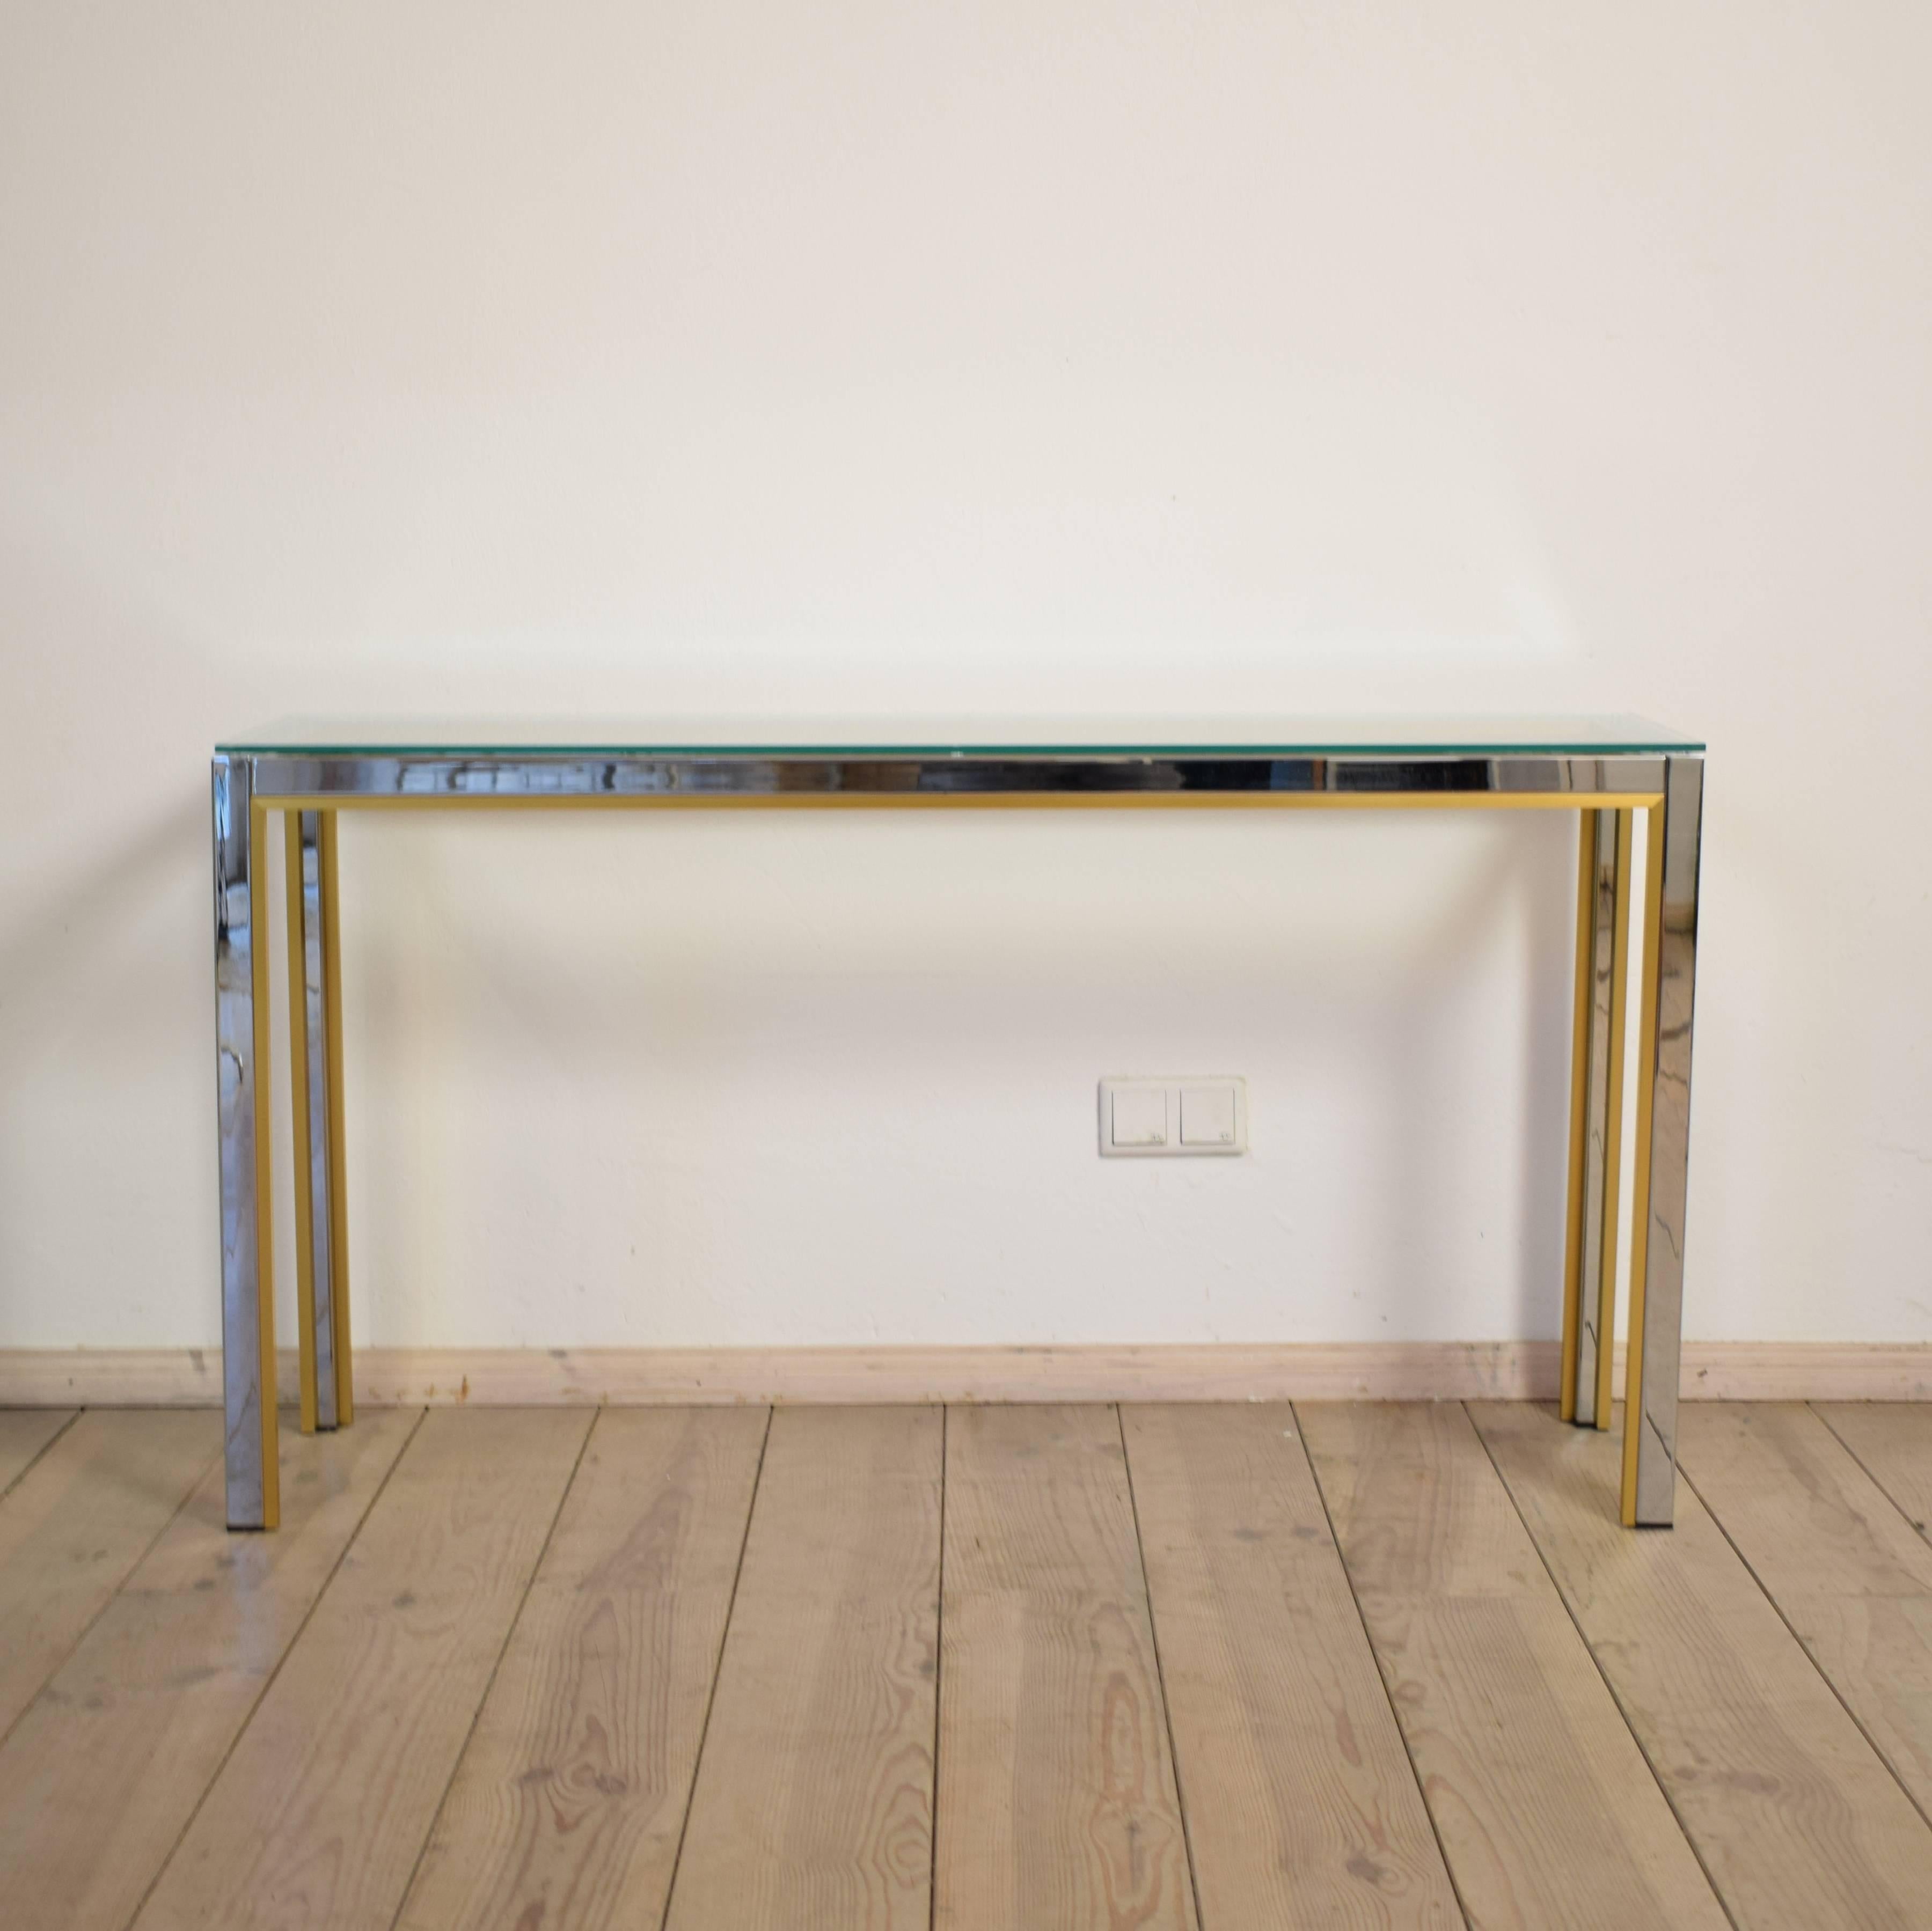 This brass and chrome console table by Renato Zevi was produced by Romeo Rega in the 1970s. A decorative piece that fits in both modern and antique interiors.